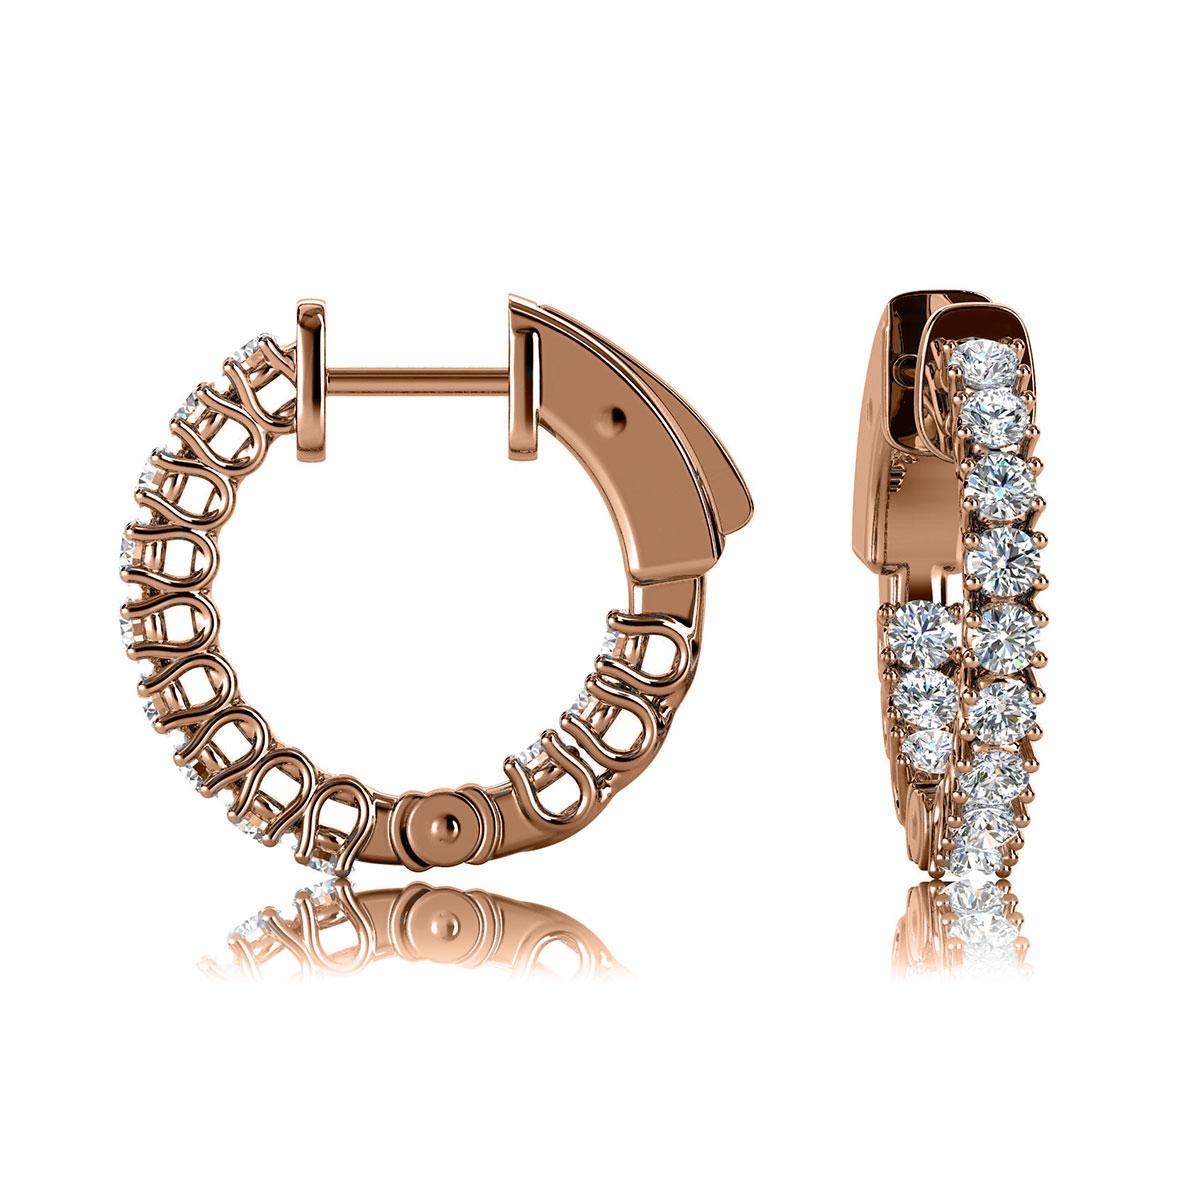 This hoop earring features round brilliant diamonds 